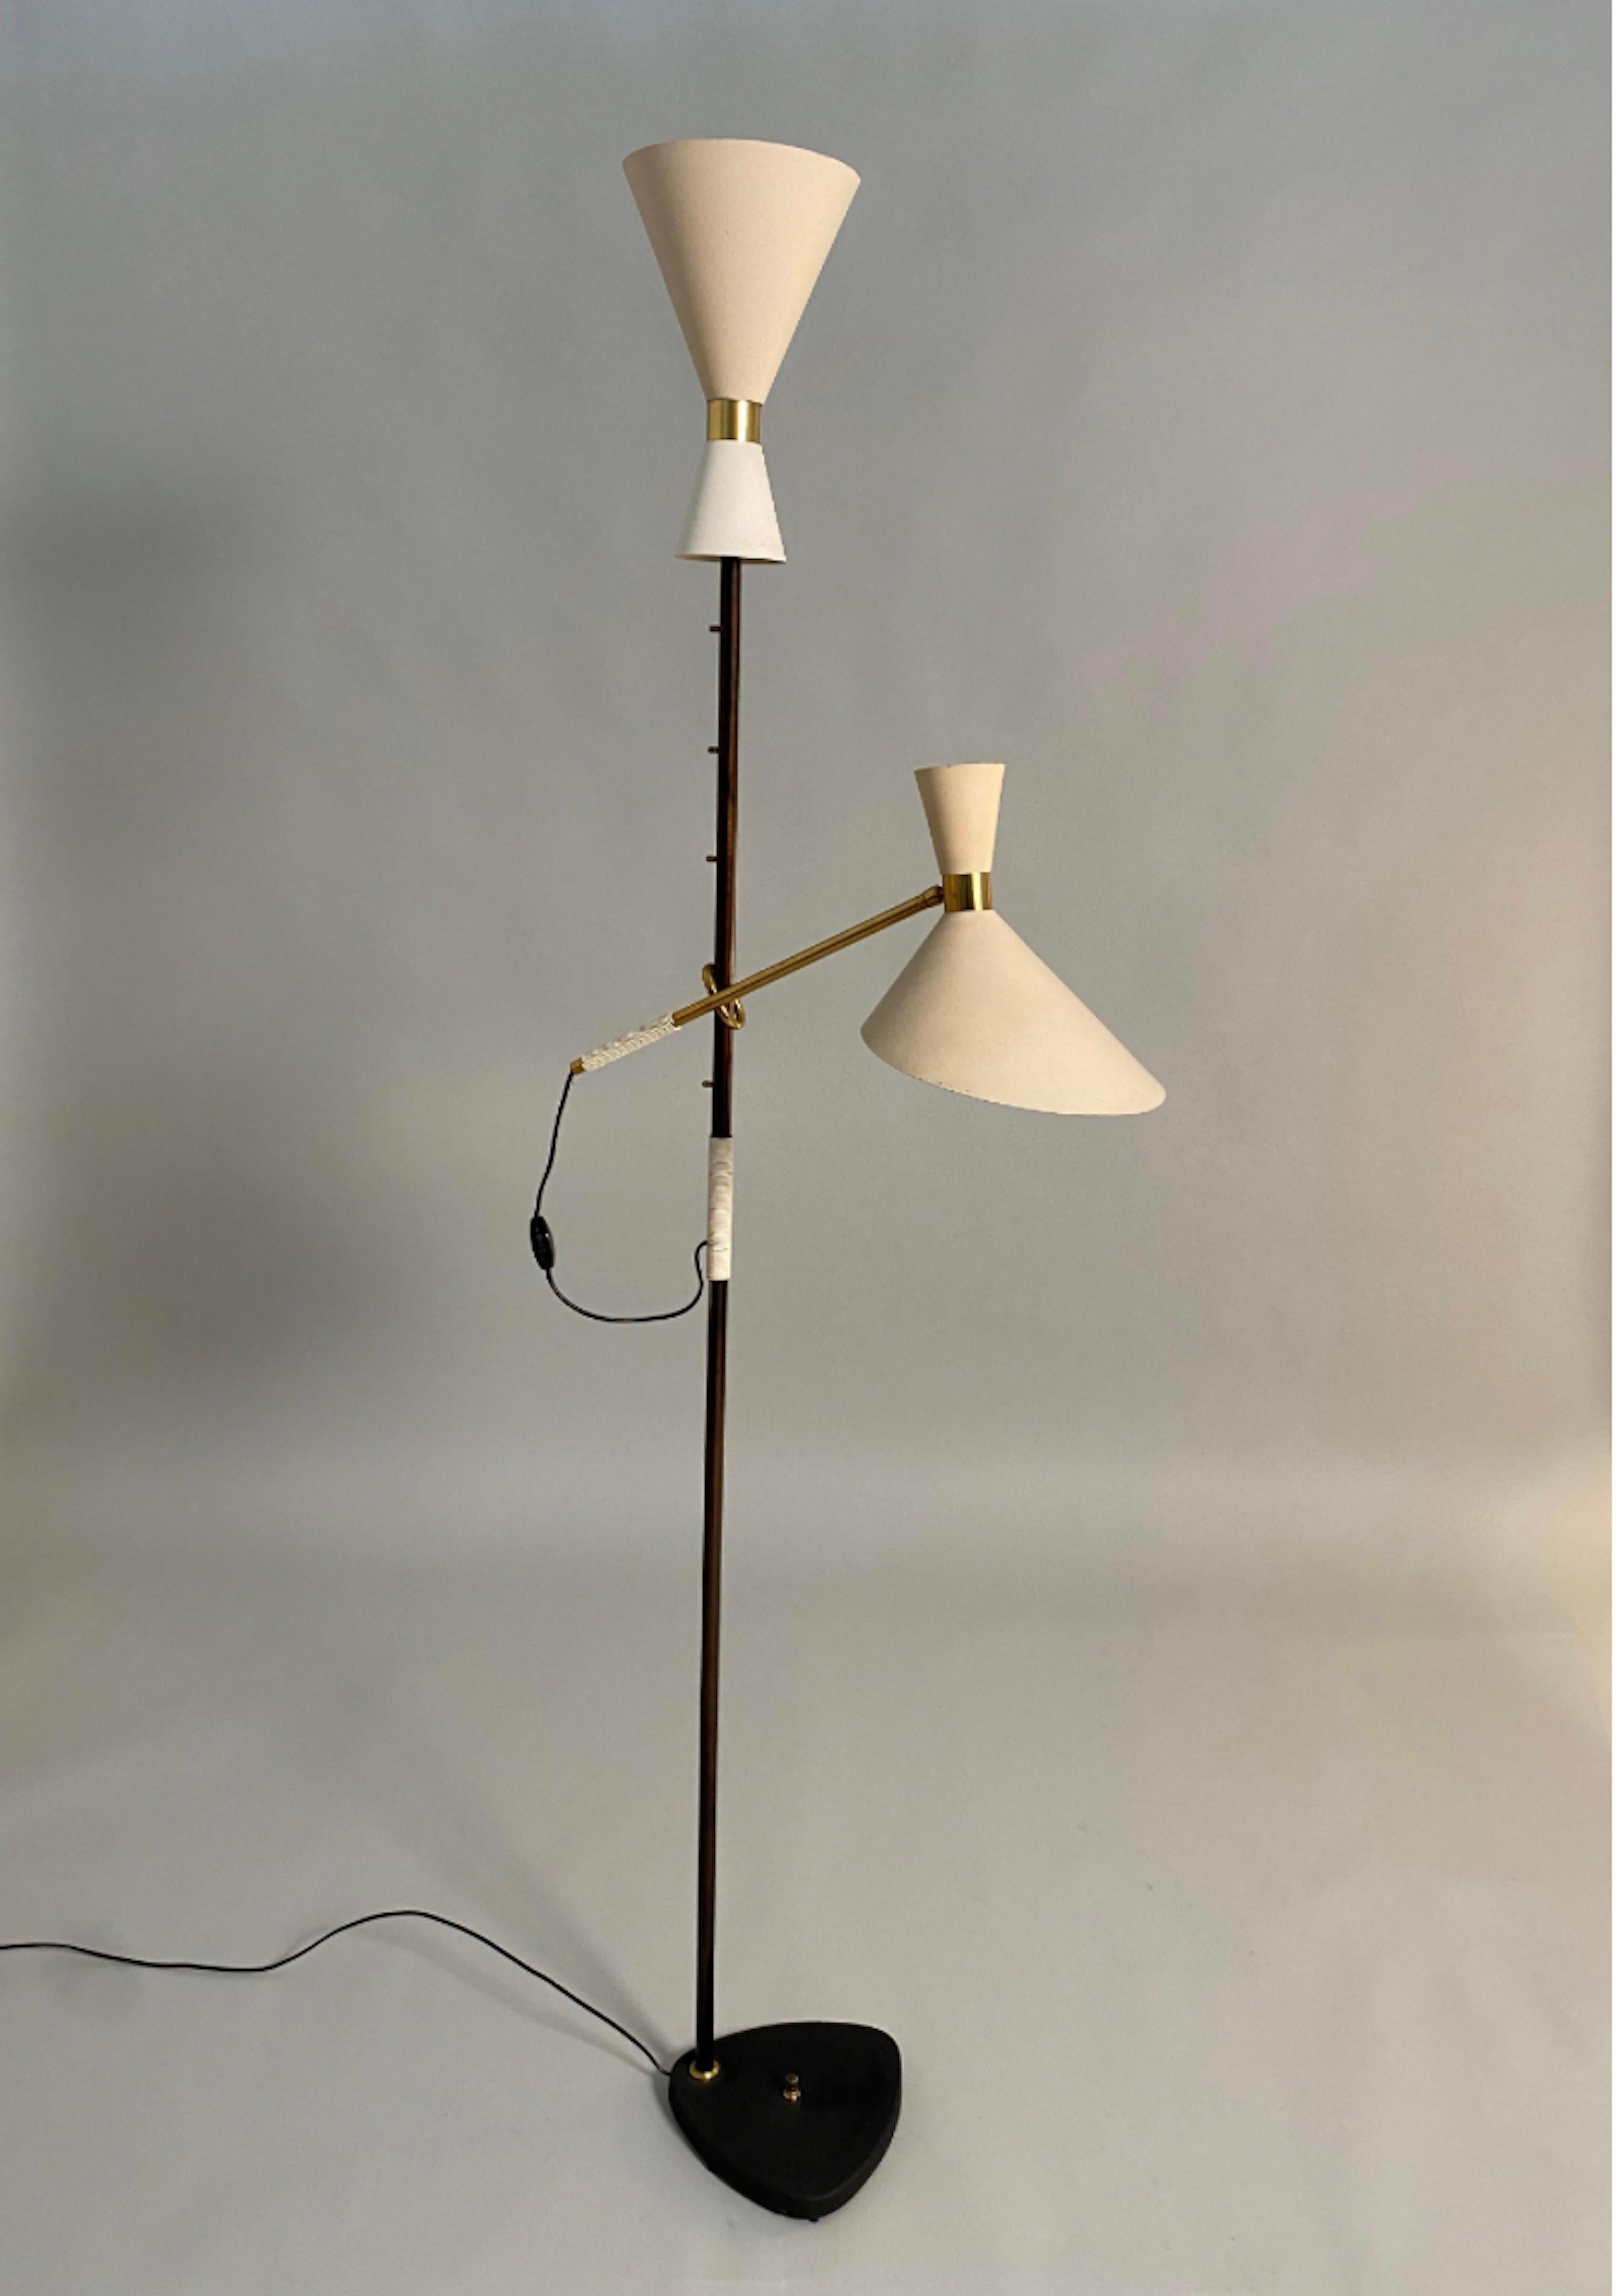 Pelikan floor lamp, mod. 2097, by the Austrian designer J.T. Kalmar. Black lacquered cast base and stem with brass details. The taupe shade on the brass arm is adjustable in five positions. Wear consistent with age and use, minor scratches and lost